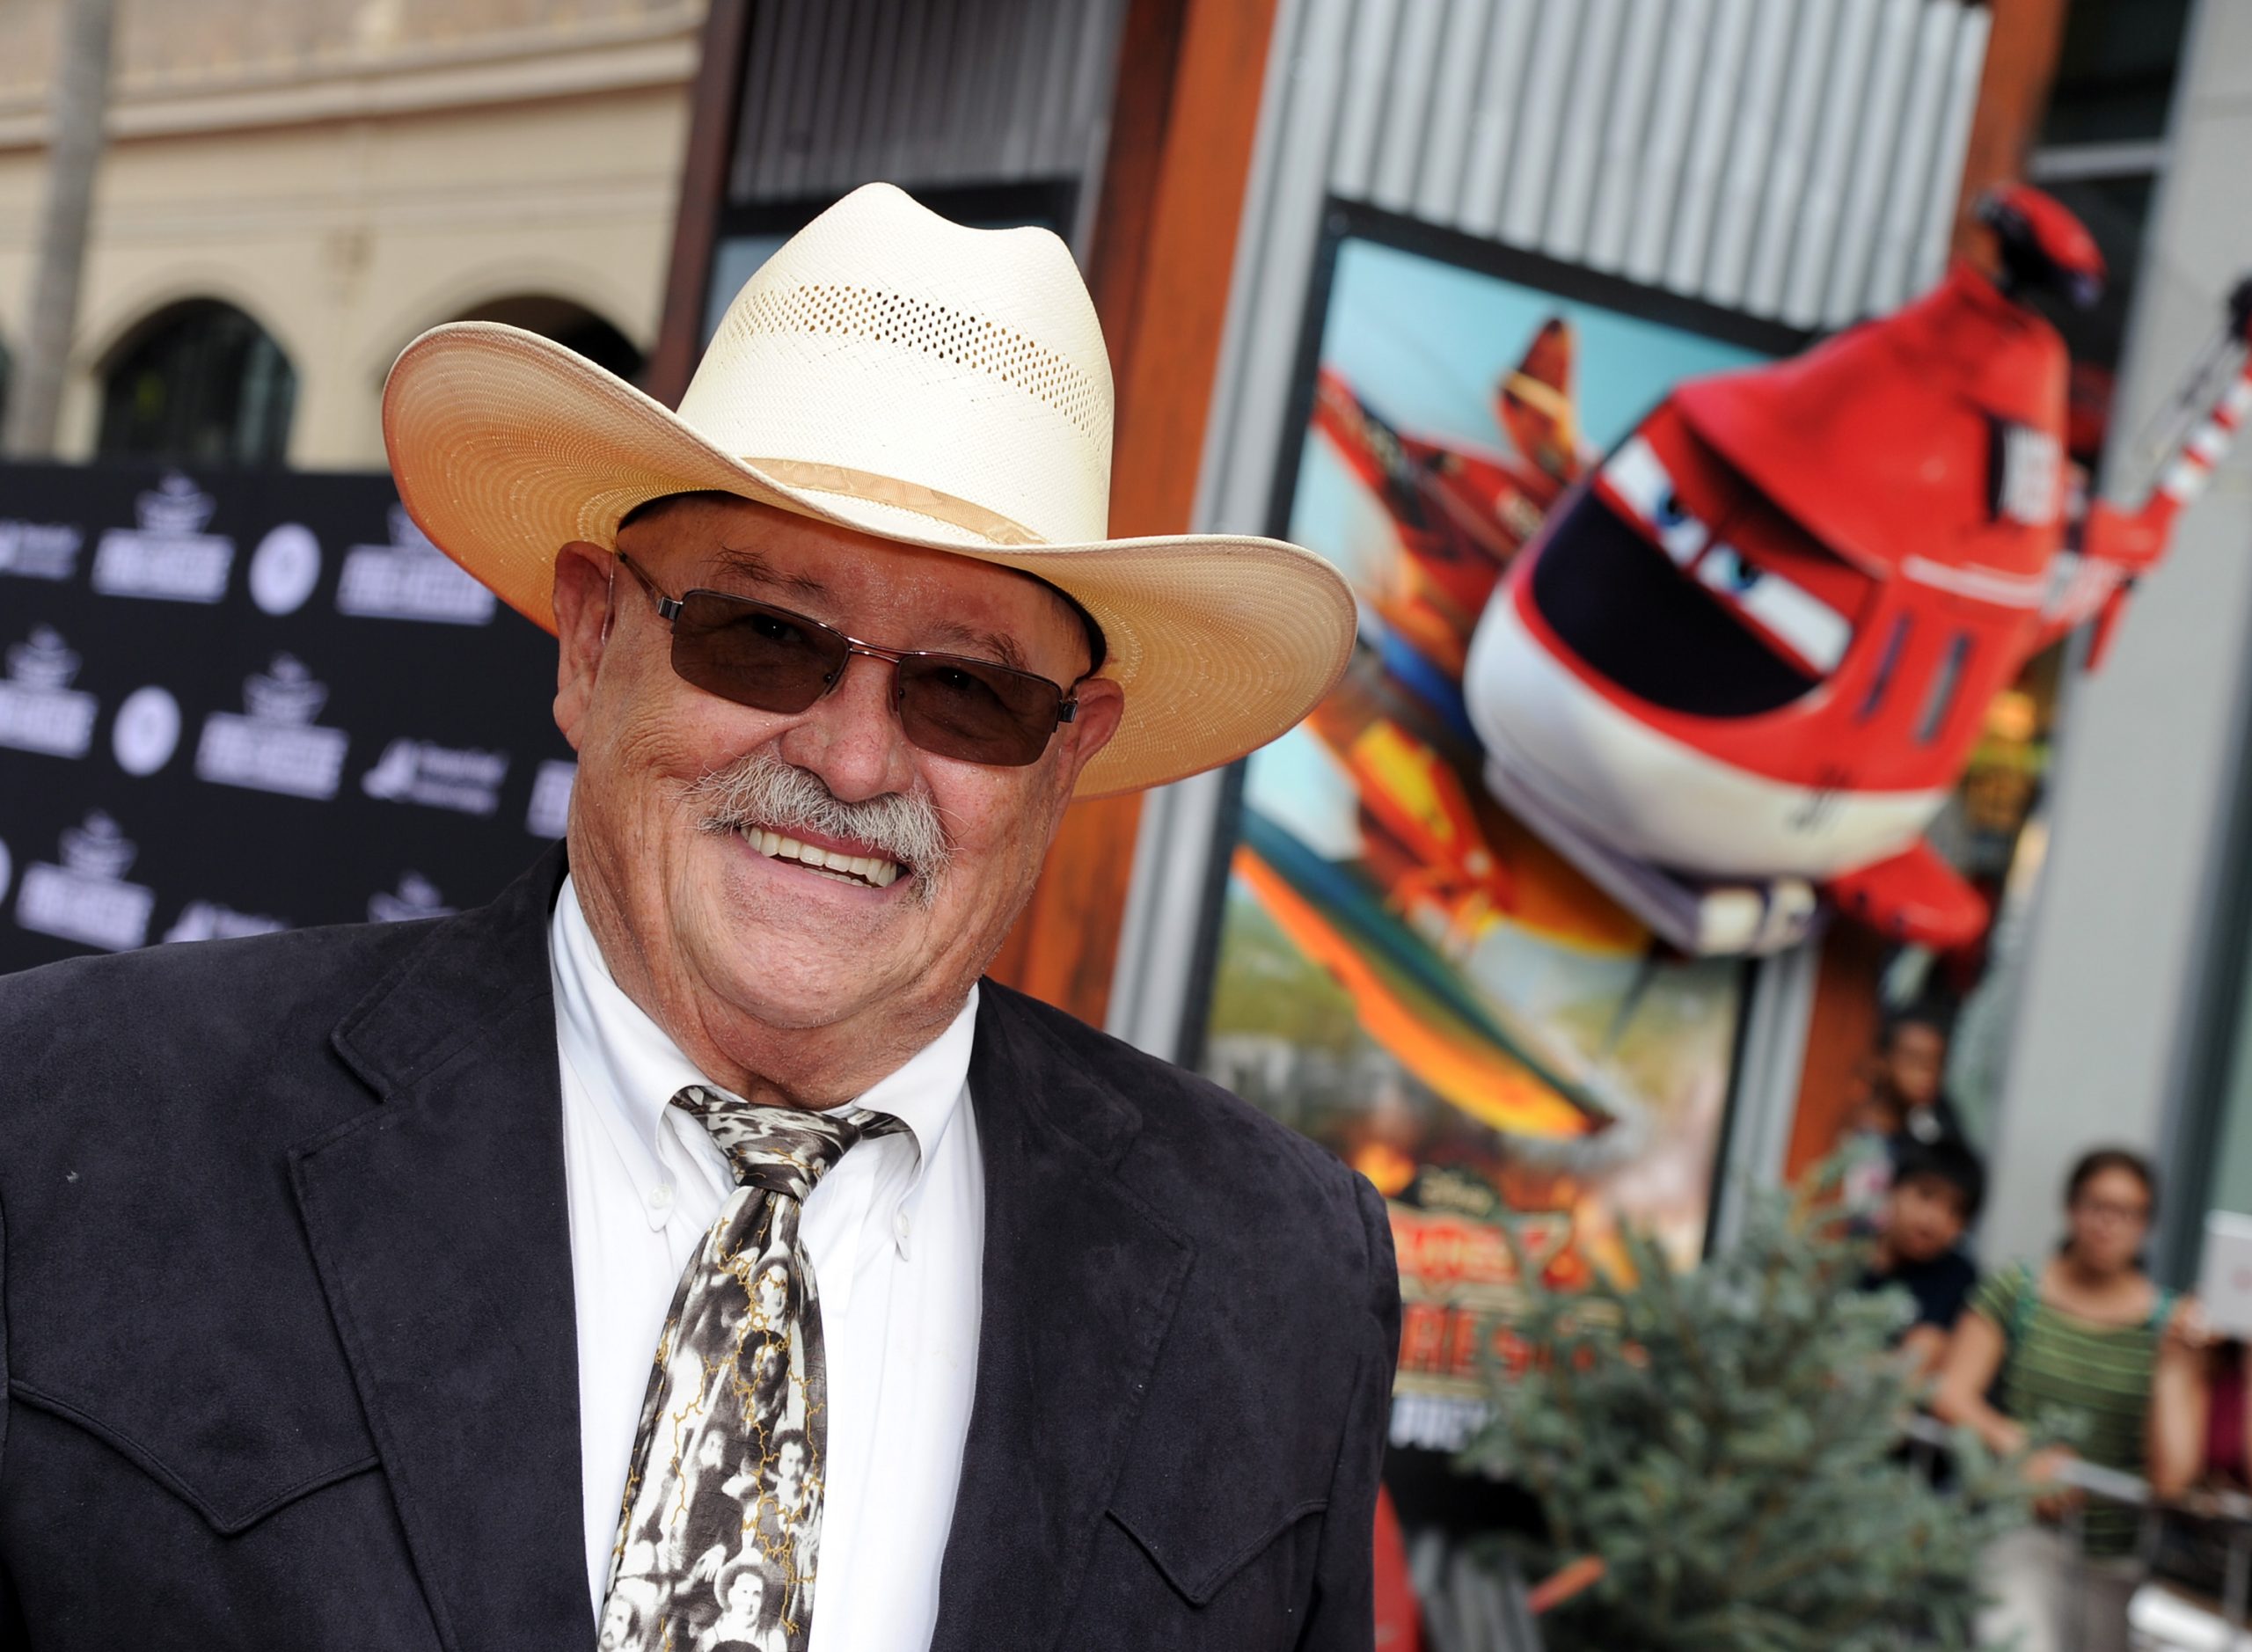 Actor Barry Corbin on July 15, 2014, in Hollywood, California.  (Photo by Kevin Winter/Getty Images)